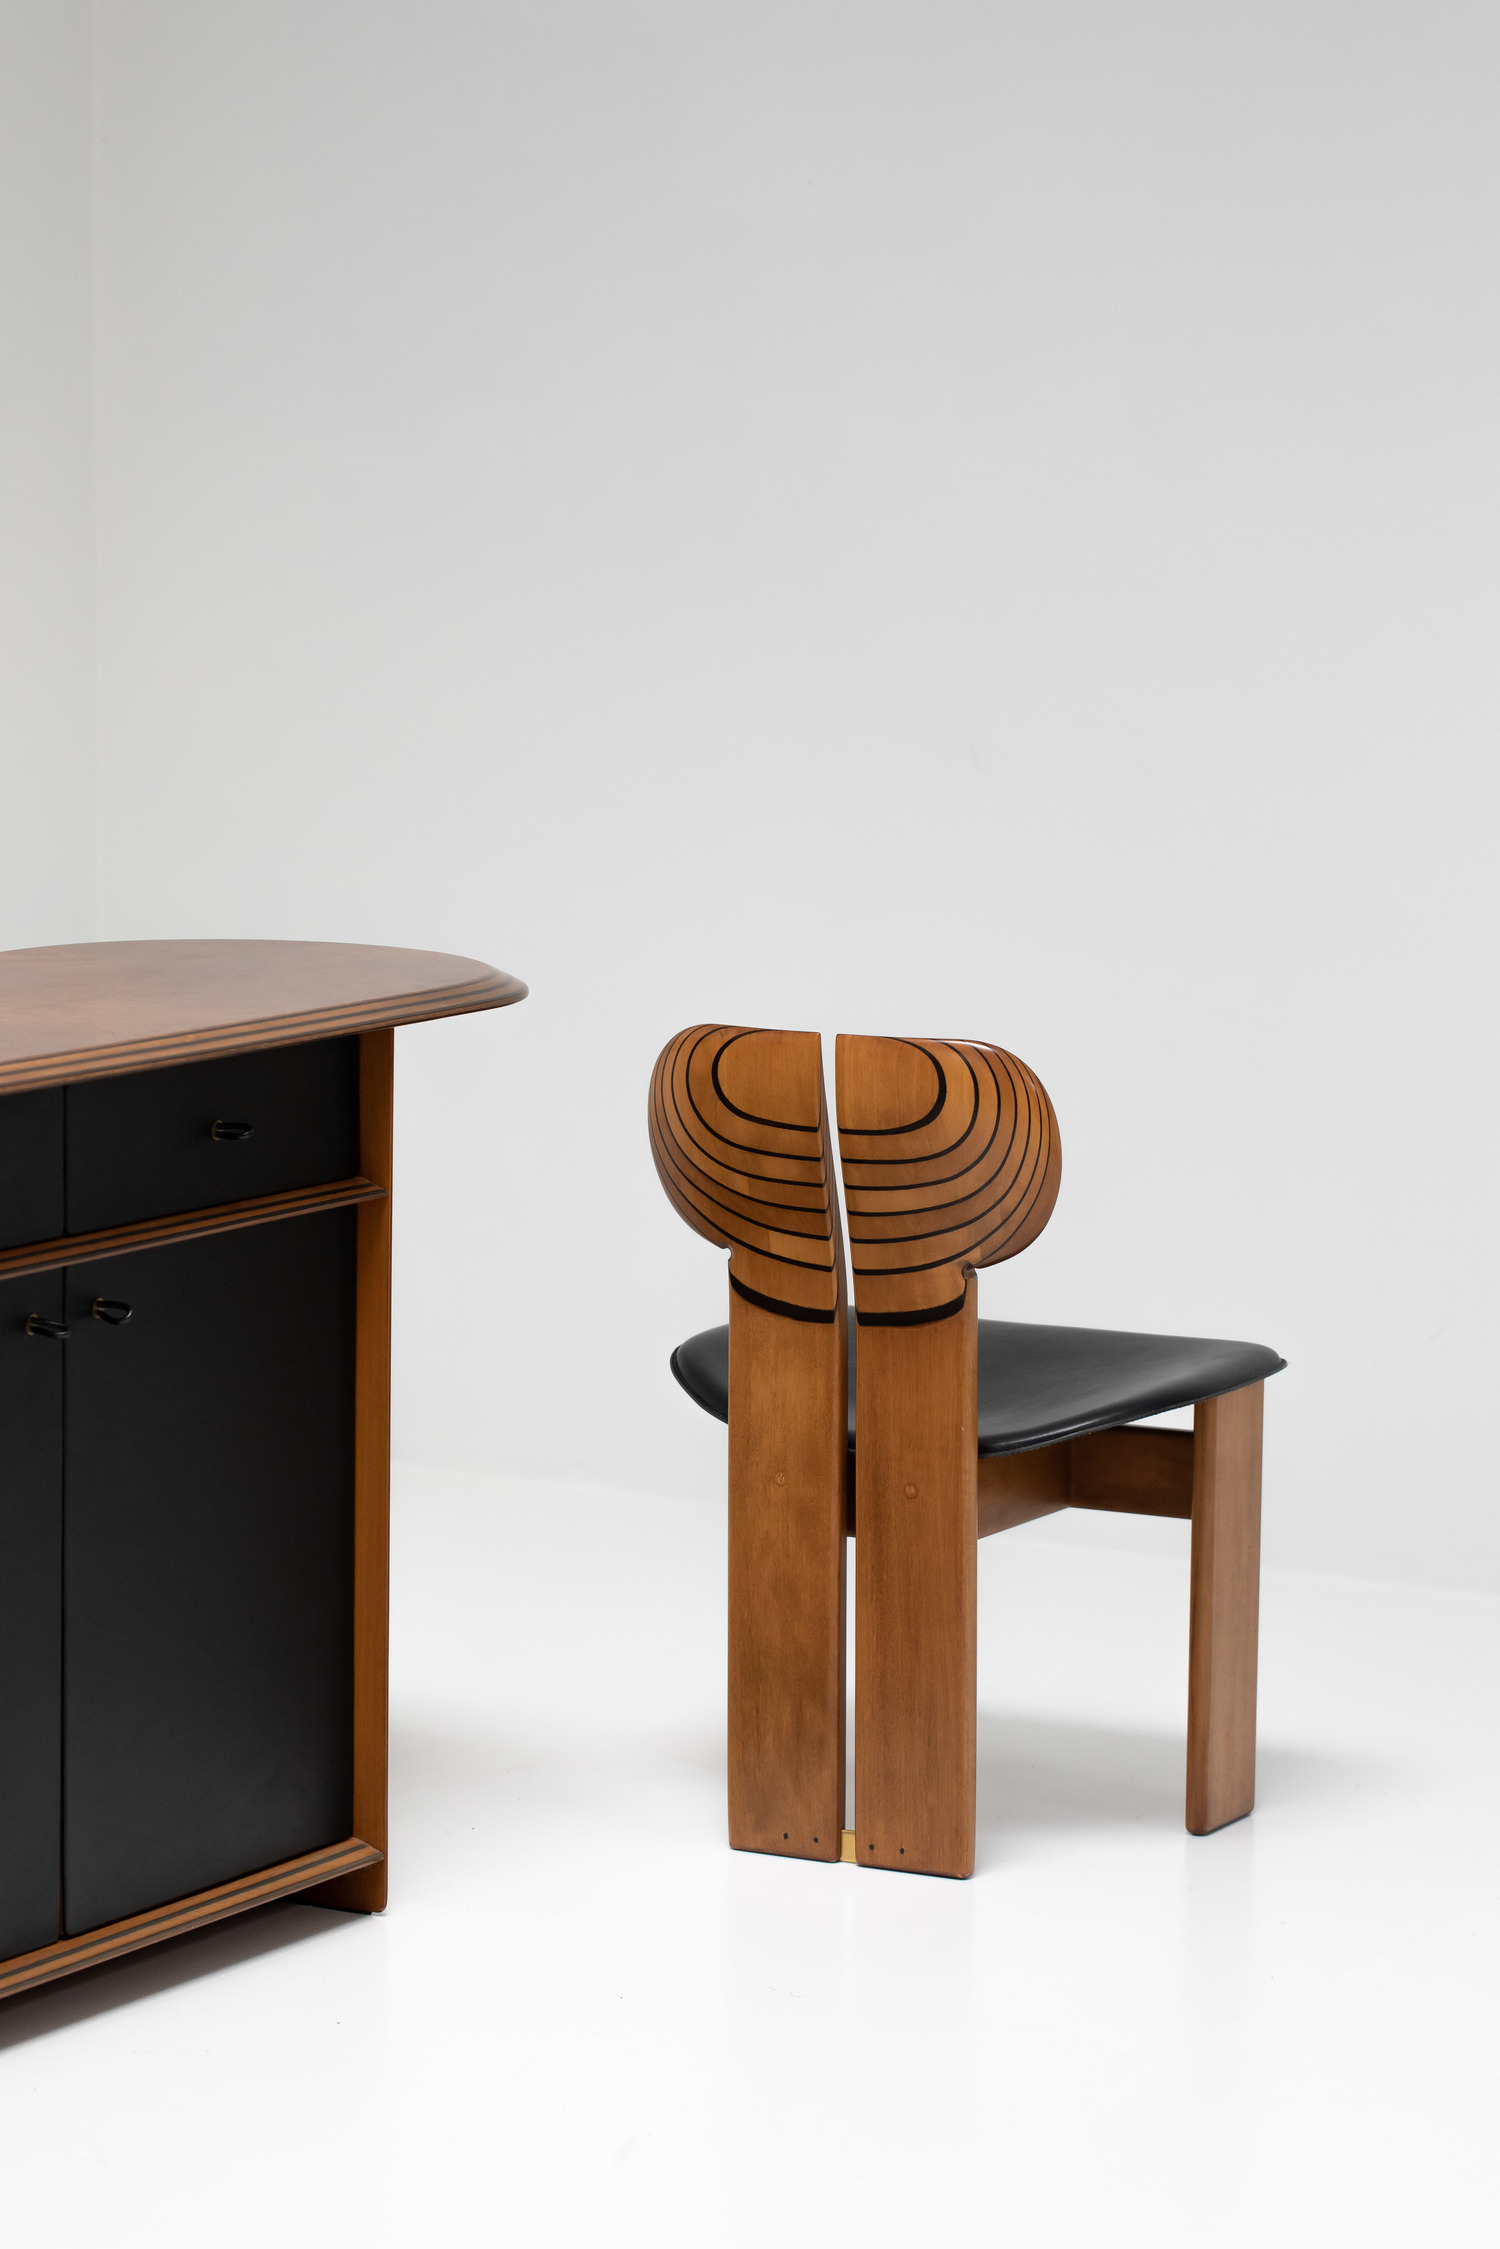 Sideboard by Afra and Tobia Scarpa for Maxalto